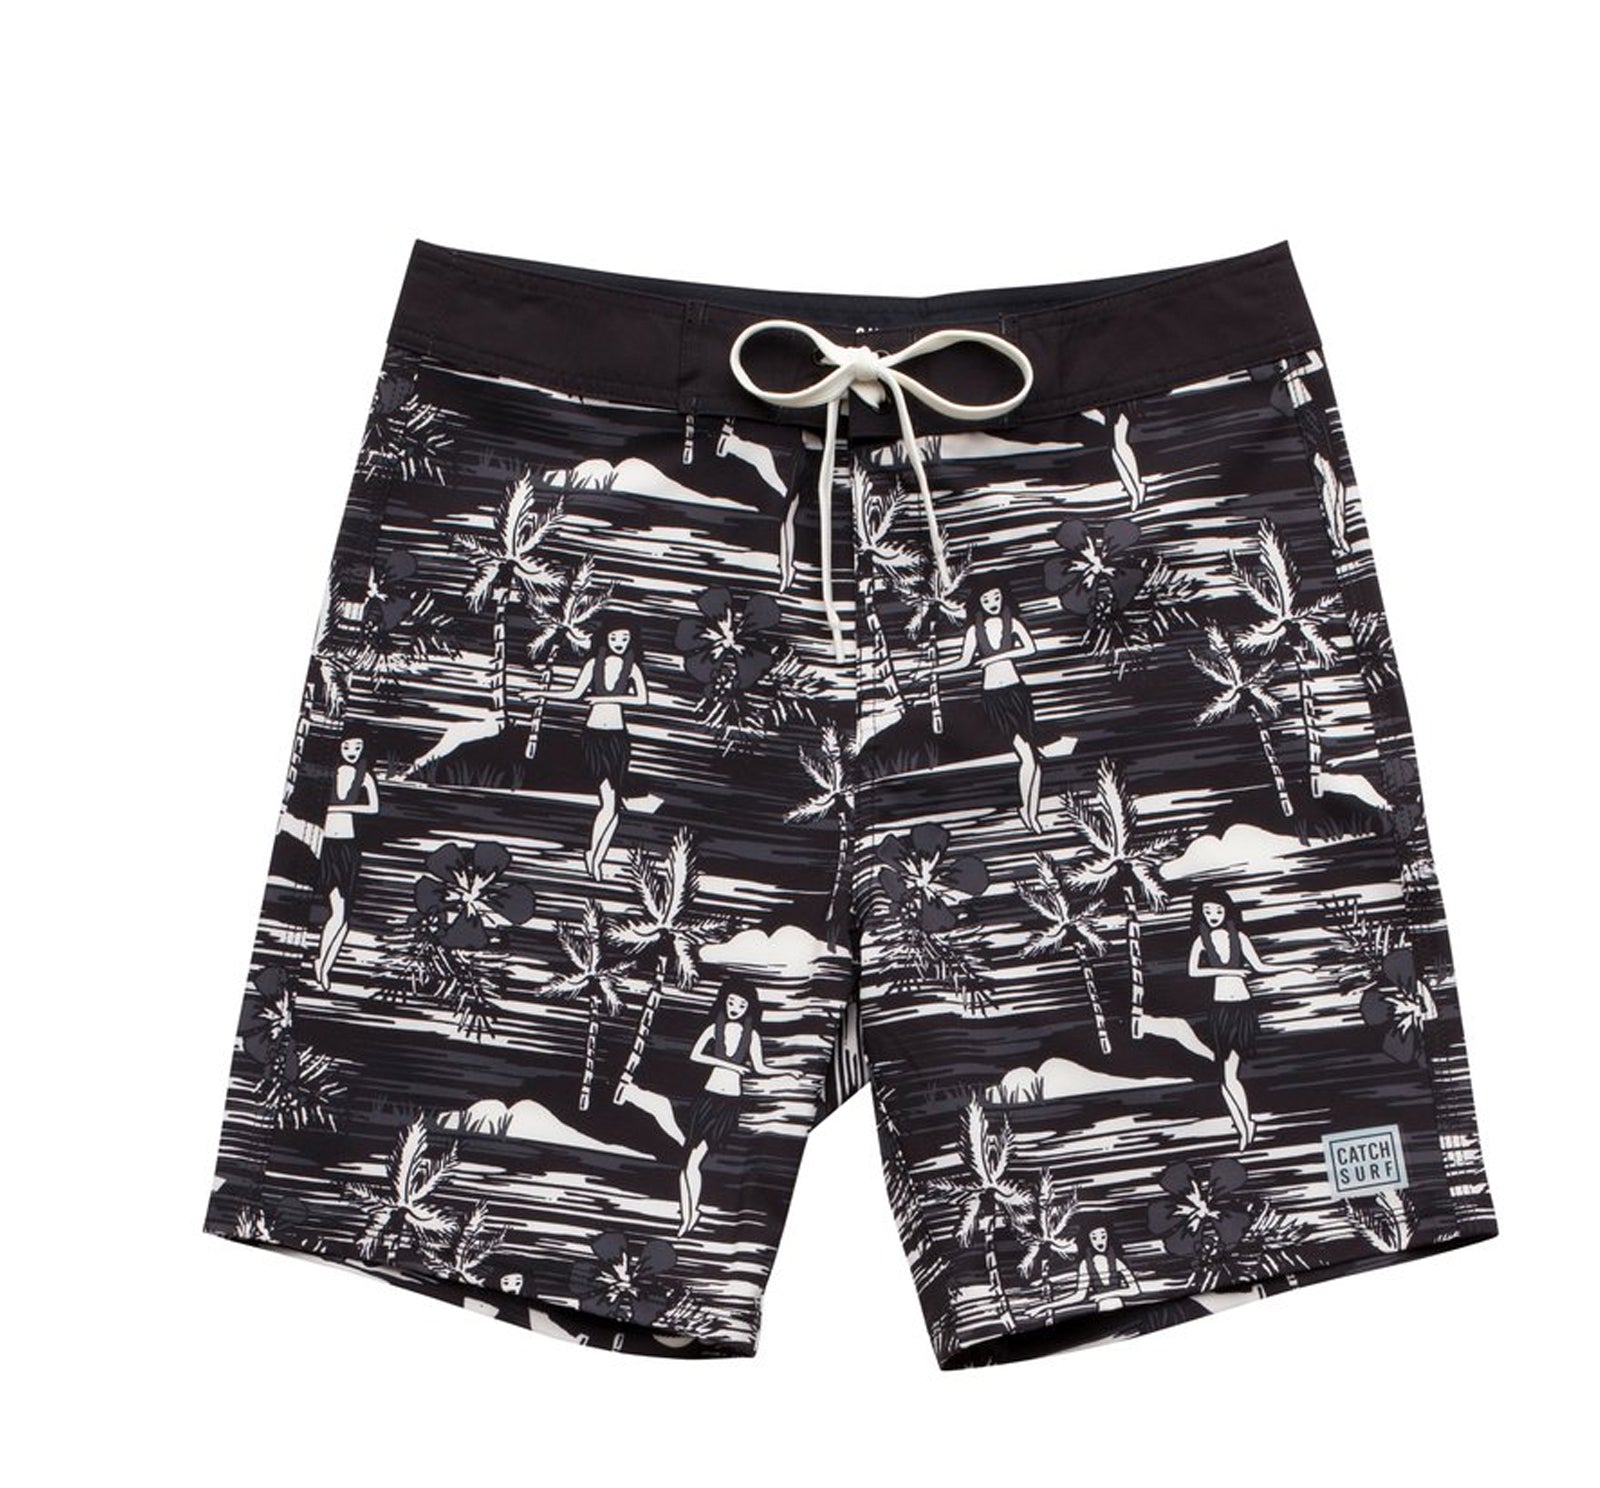 Catch Surf All Day 18" Men's Boardshorts